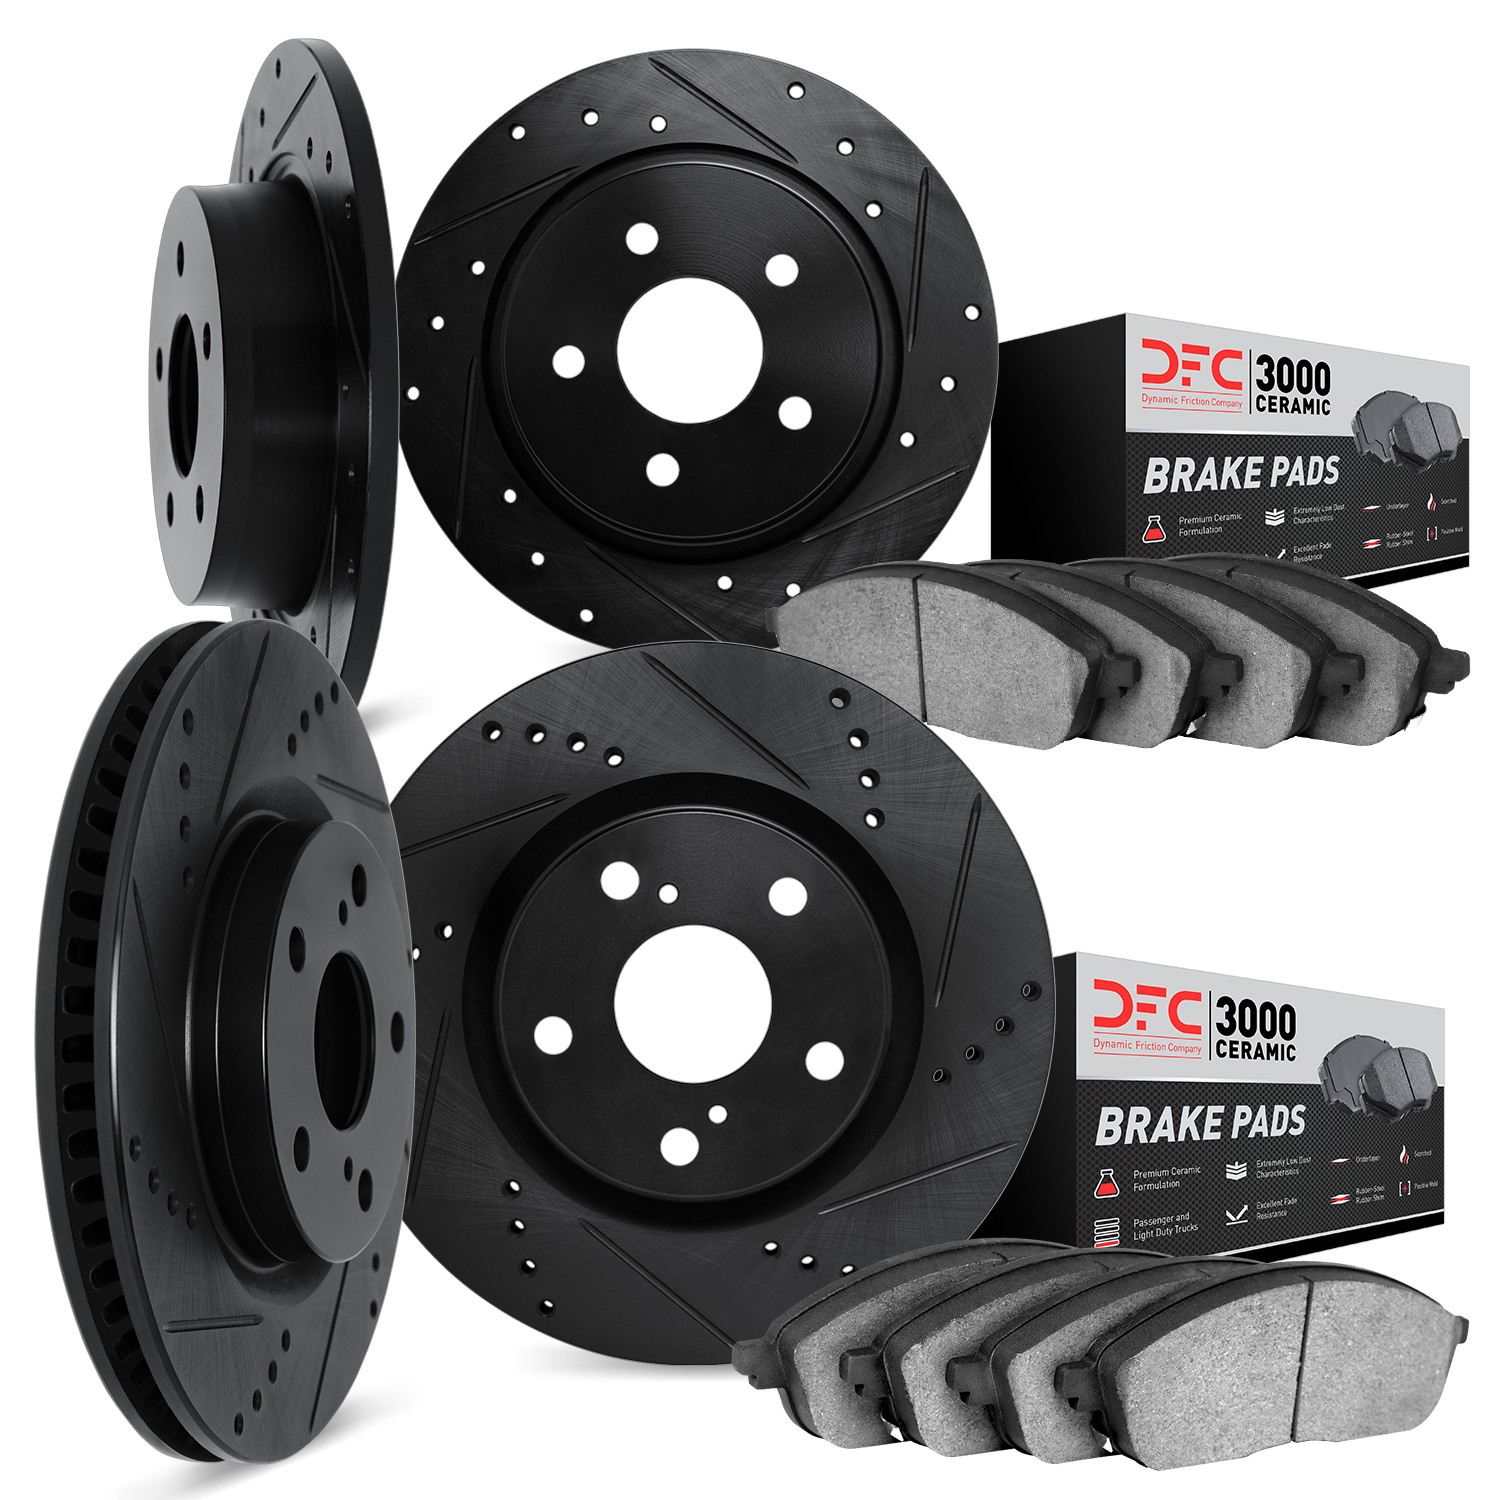 8304-59037 Drilled/Slotted Brake Rotors with 3000-Series Ceramic Brake Pads Kit [Black], 2003-2011 Acura/Honda, Position: Front